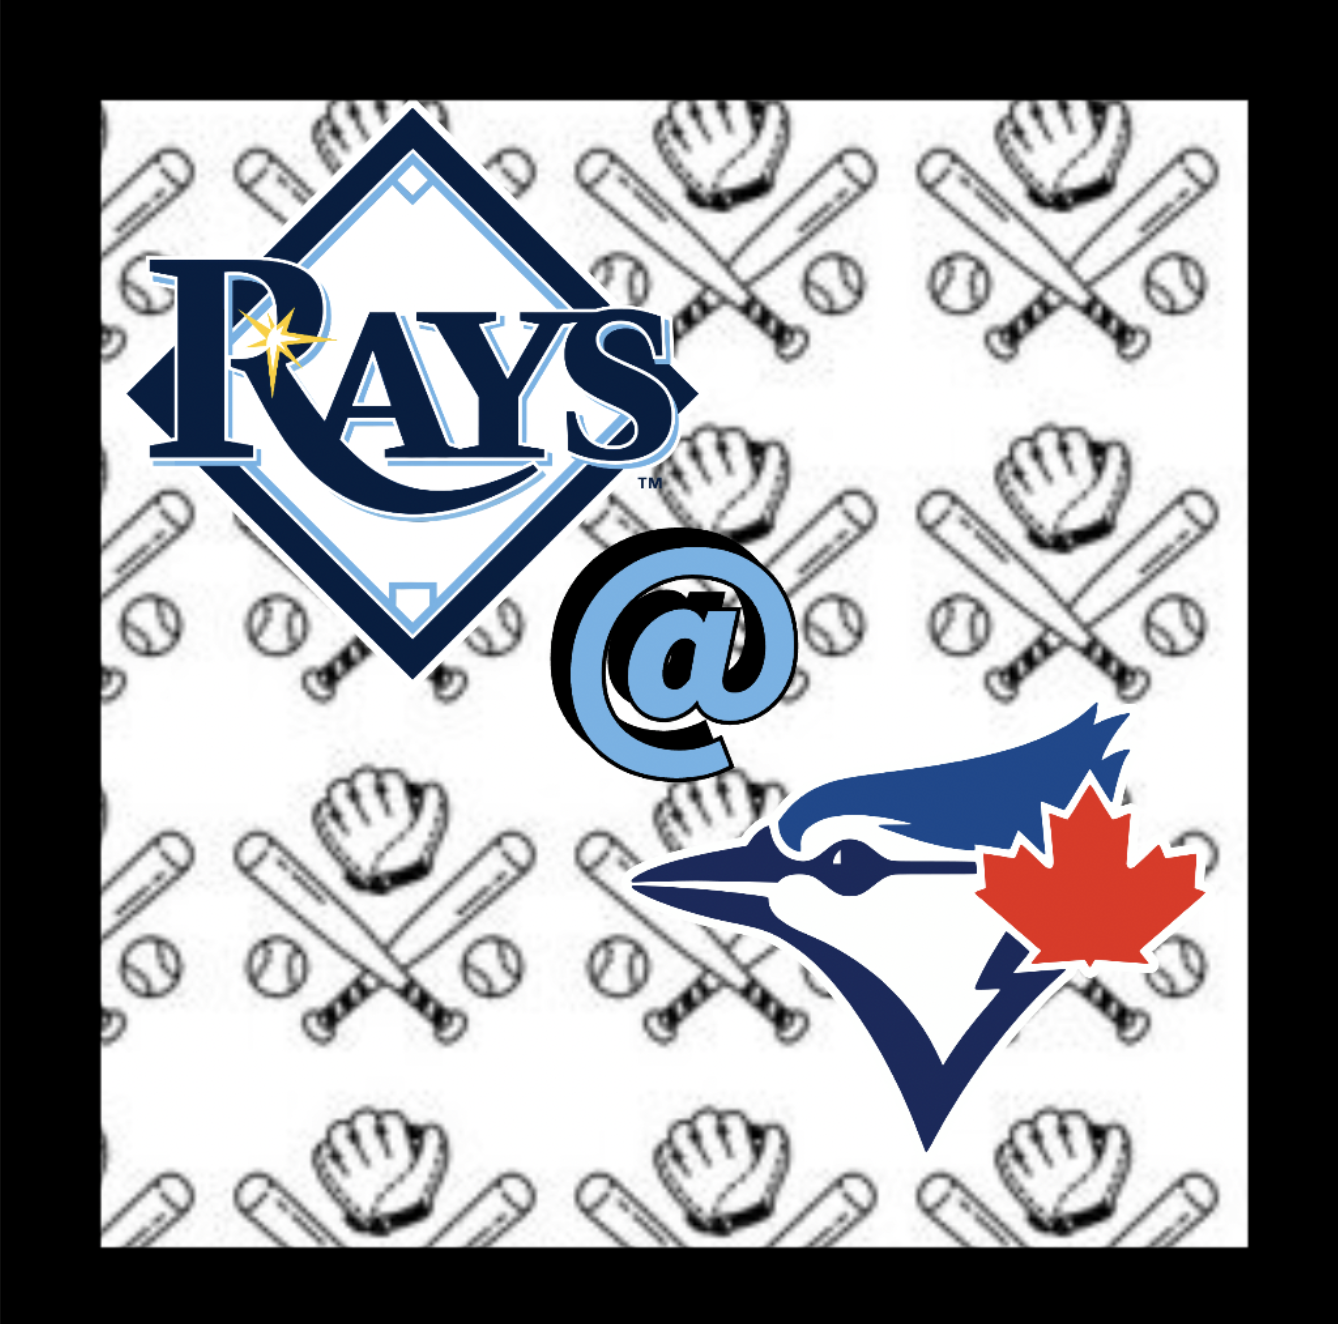 Rays Losing Their Strong Swim